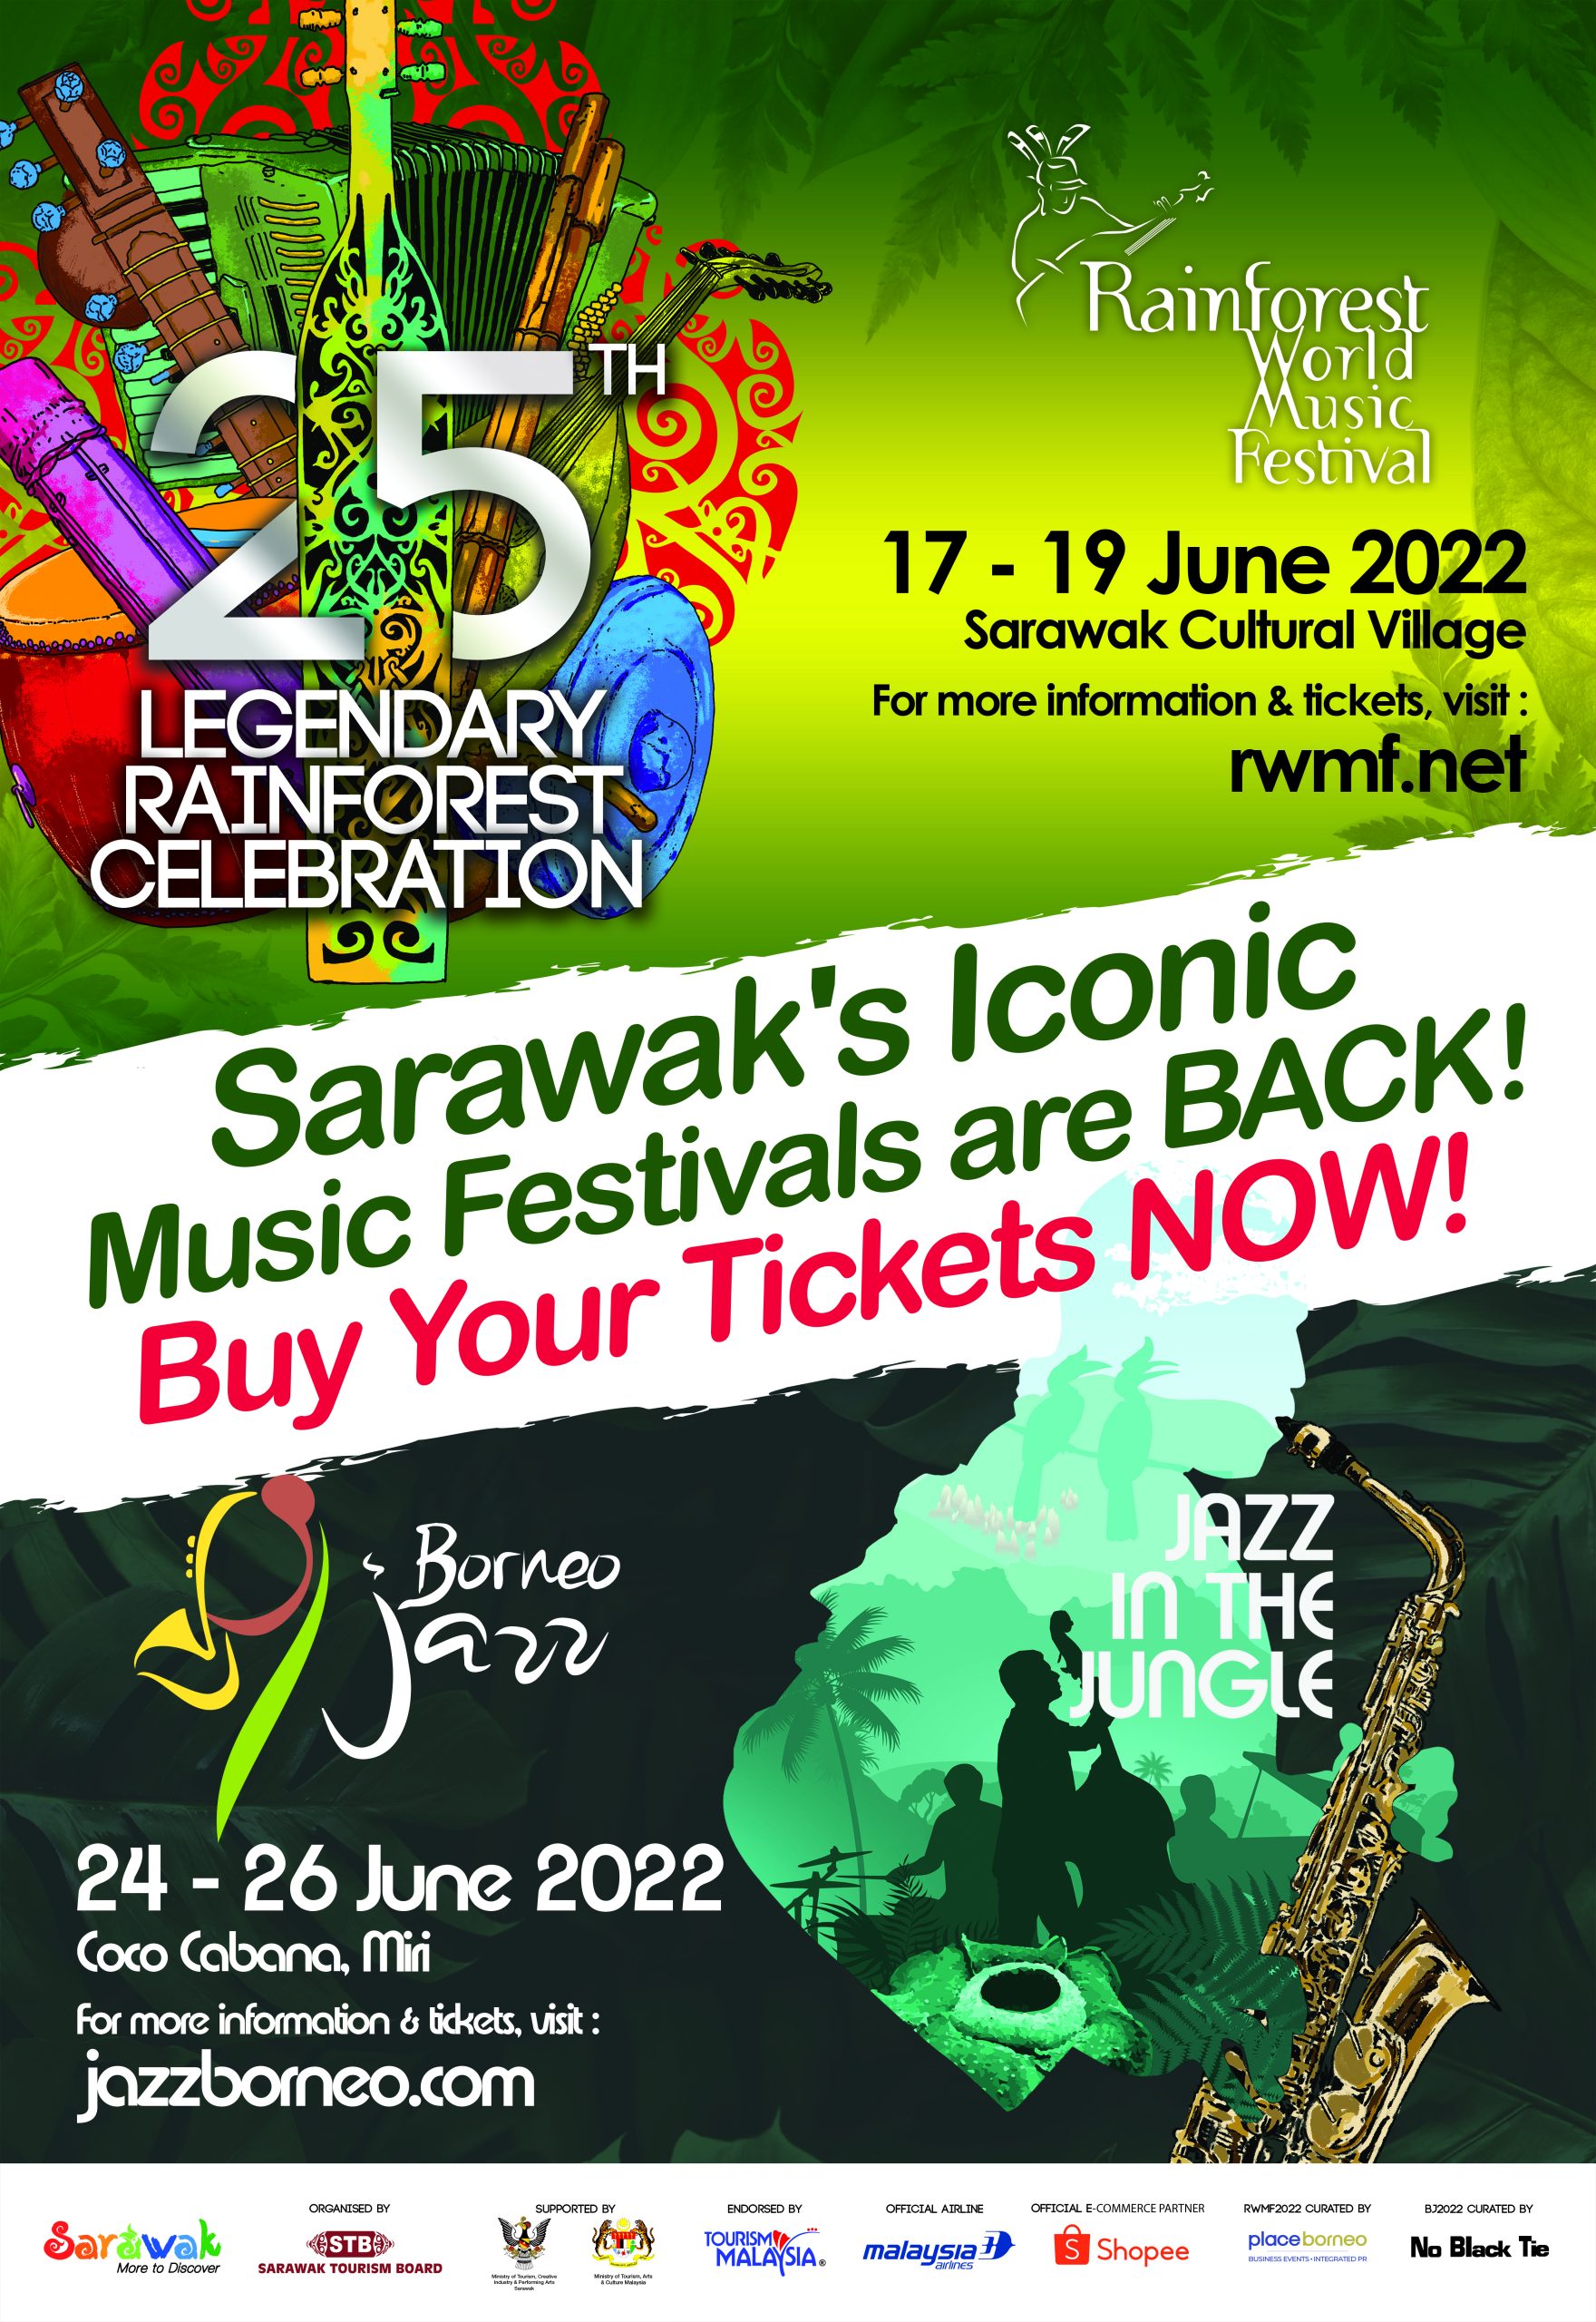 Rainforest World Music Festival And Borneo Jazz 2022 Tickets Are Available  Now